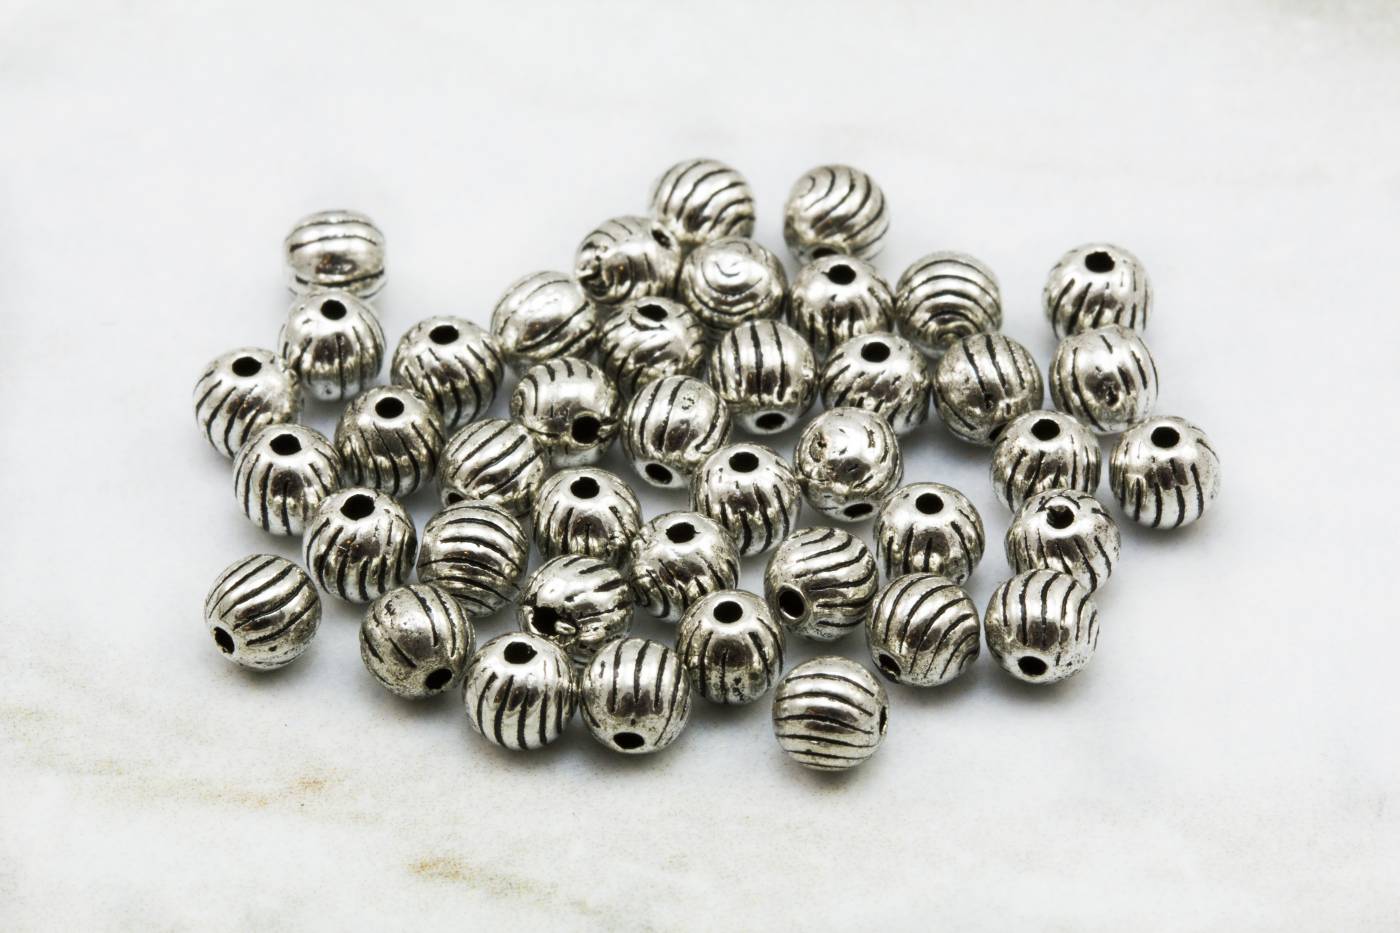 5mm-mini-round-ball-spacer-bead-findings